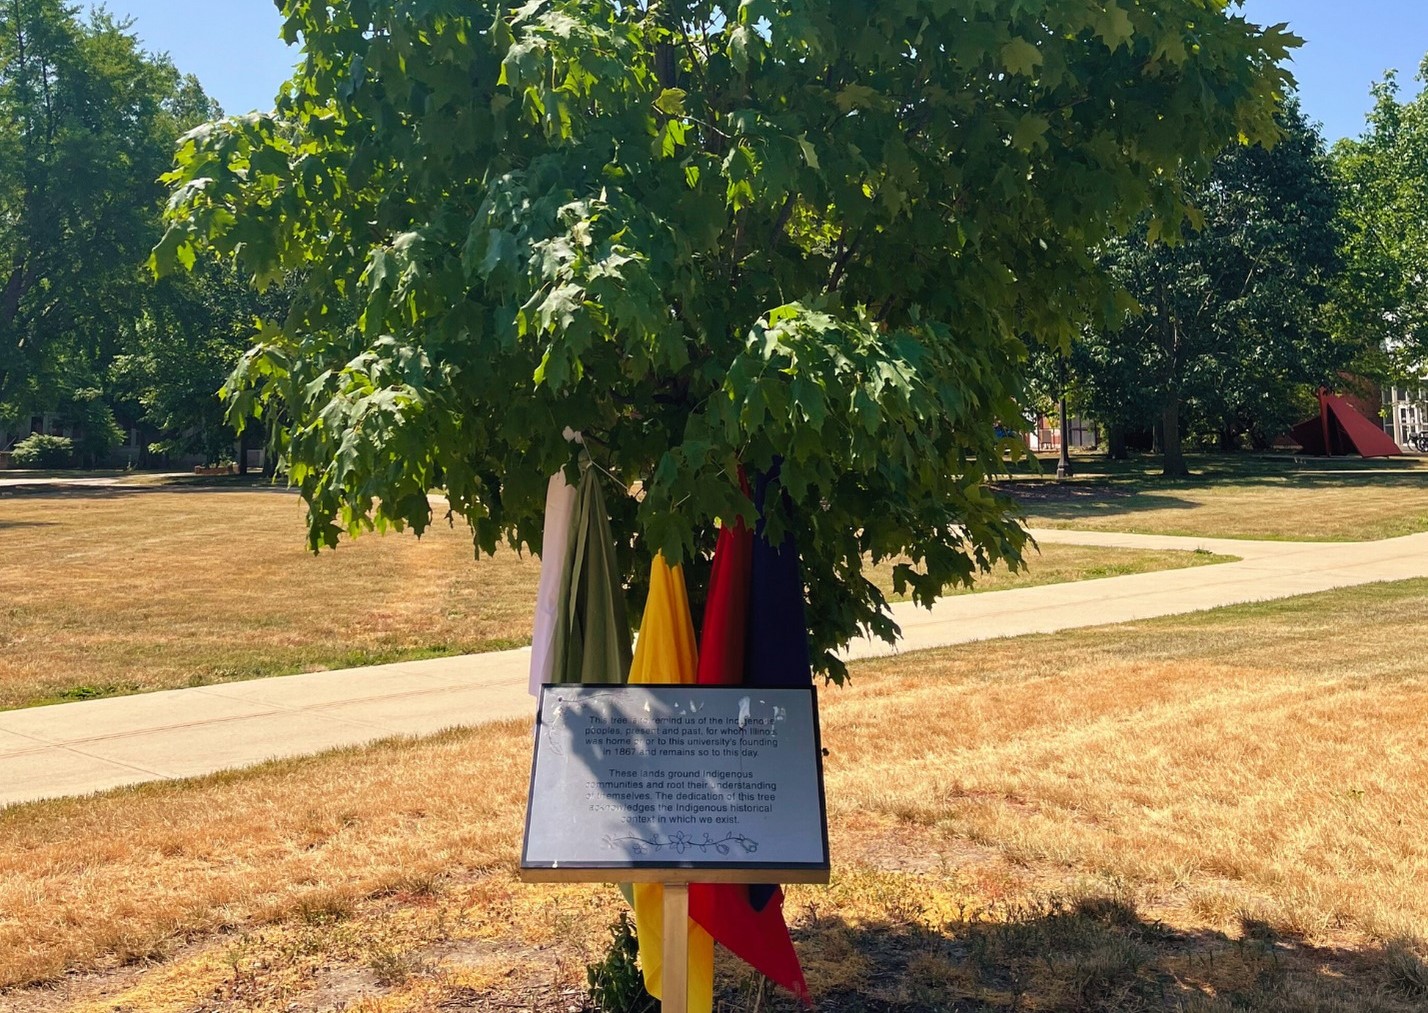 A leafy green tree with colorful scarves hanging from it. There is a plaque in front of it that pays homage to indigenous peoples.